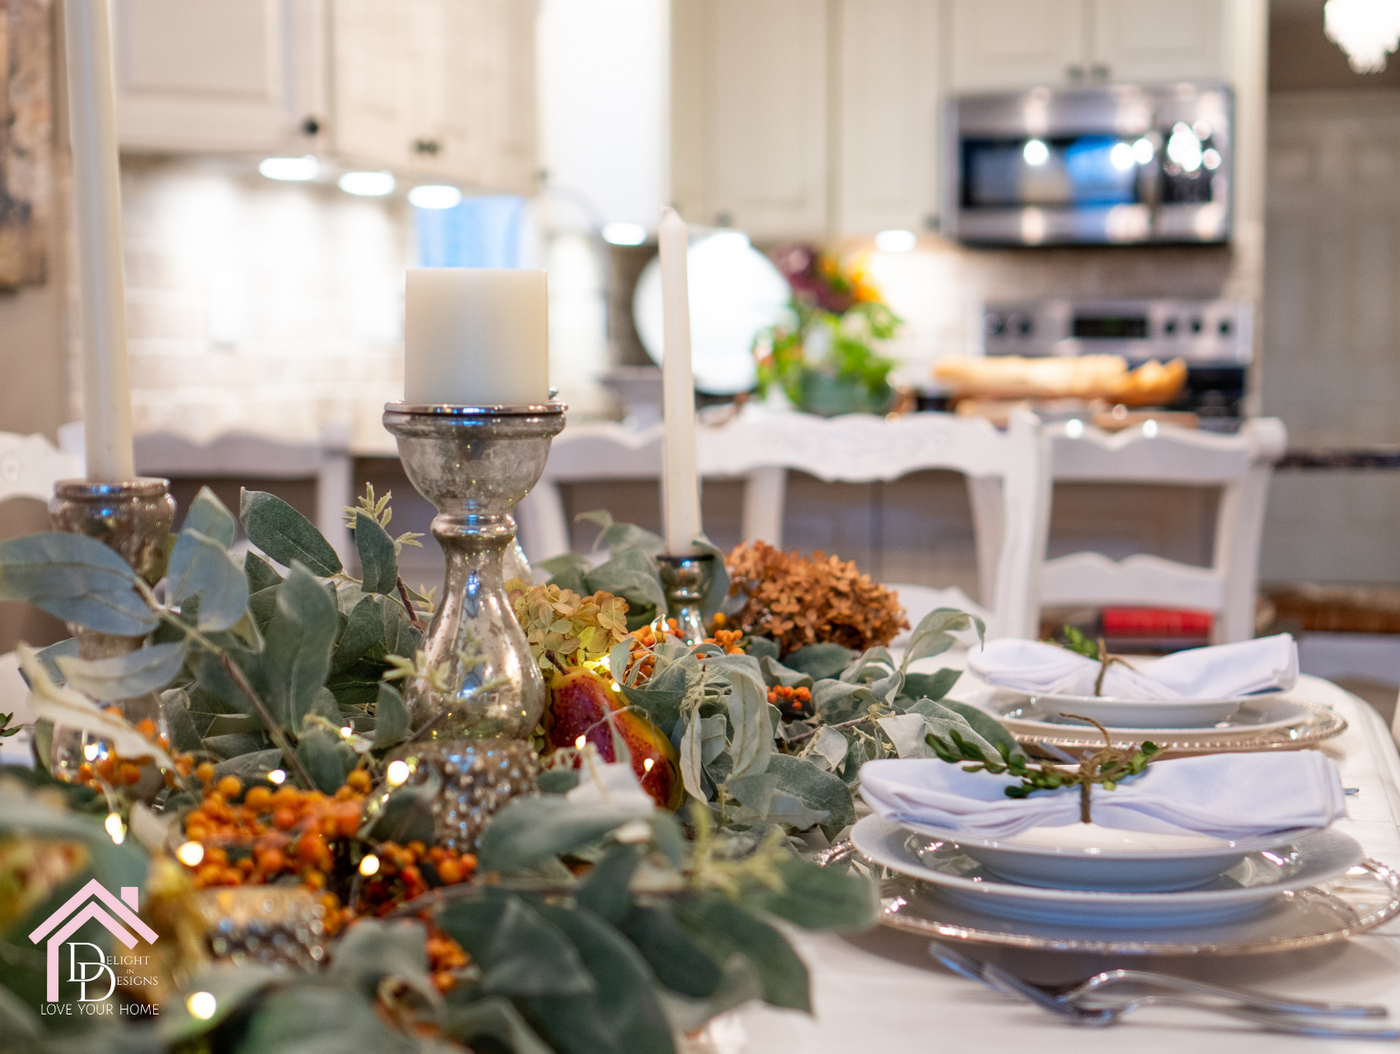 4 Simple Steps to Make Holiday Hosting a Breeze